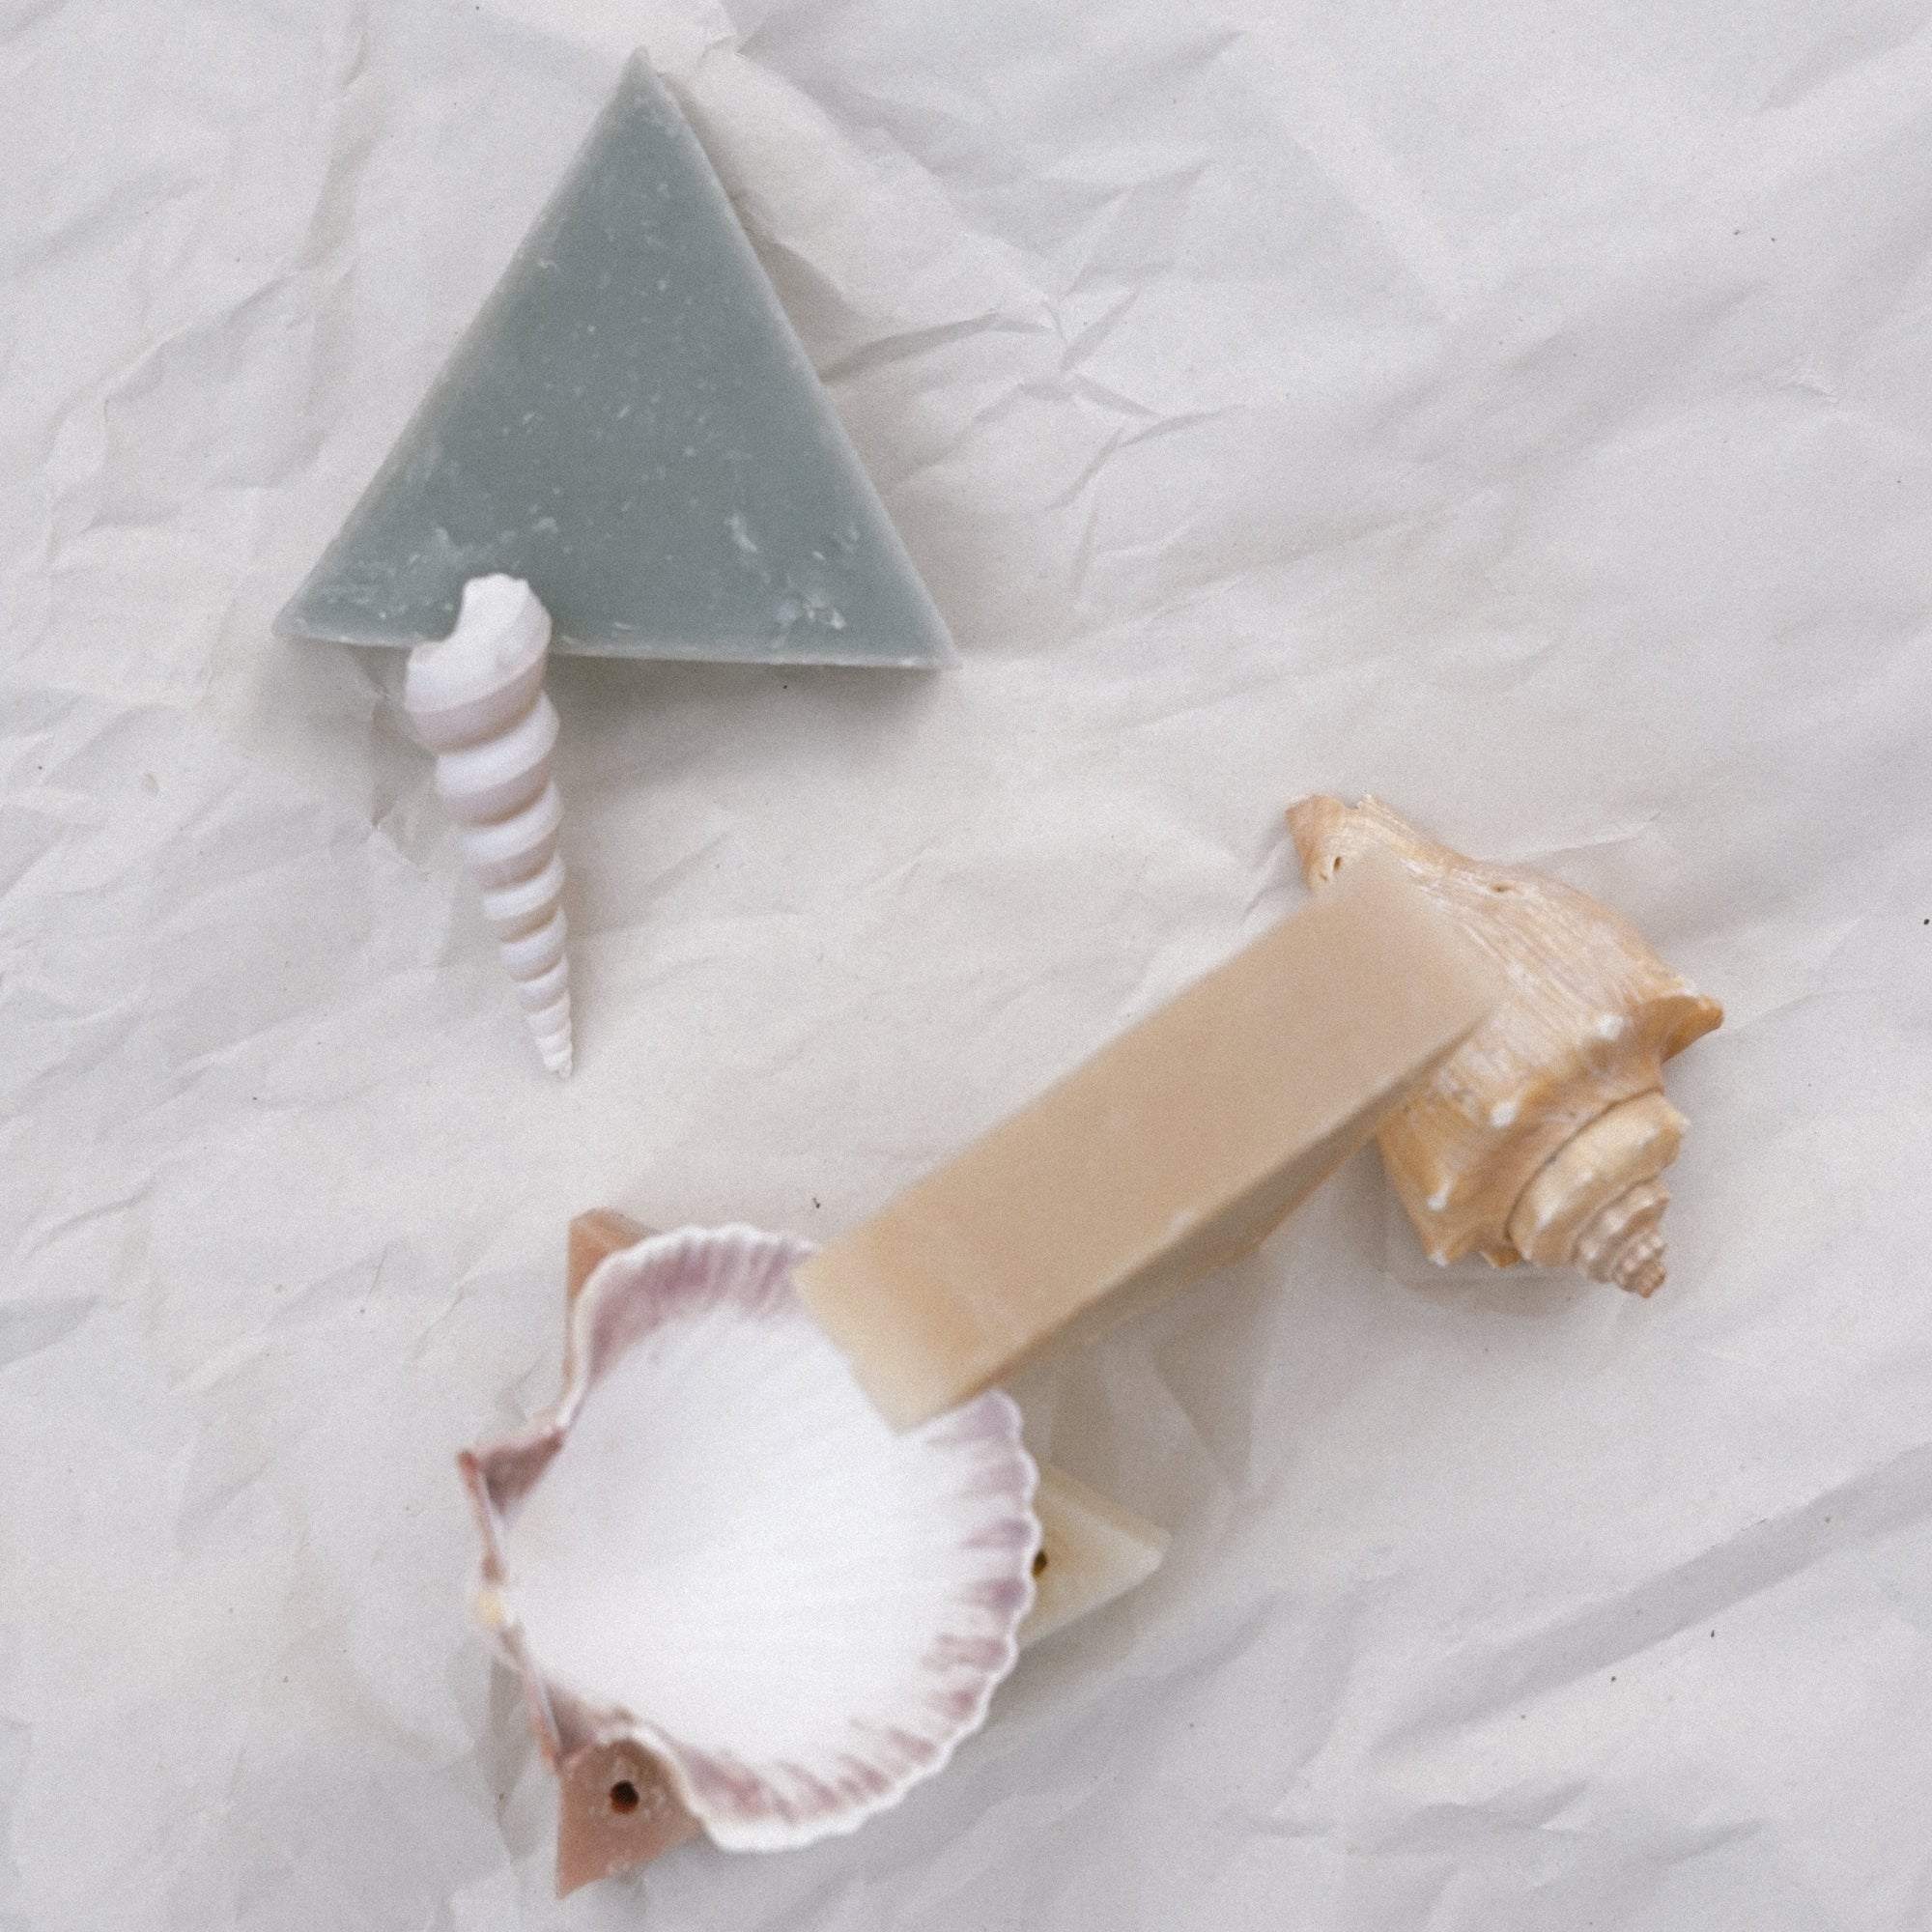 Two triangle soaps with seashells against white crinkled paper